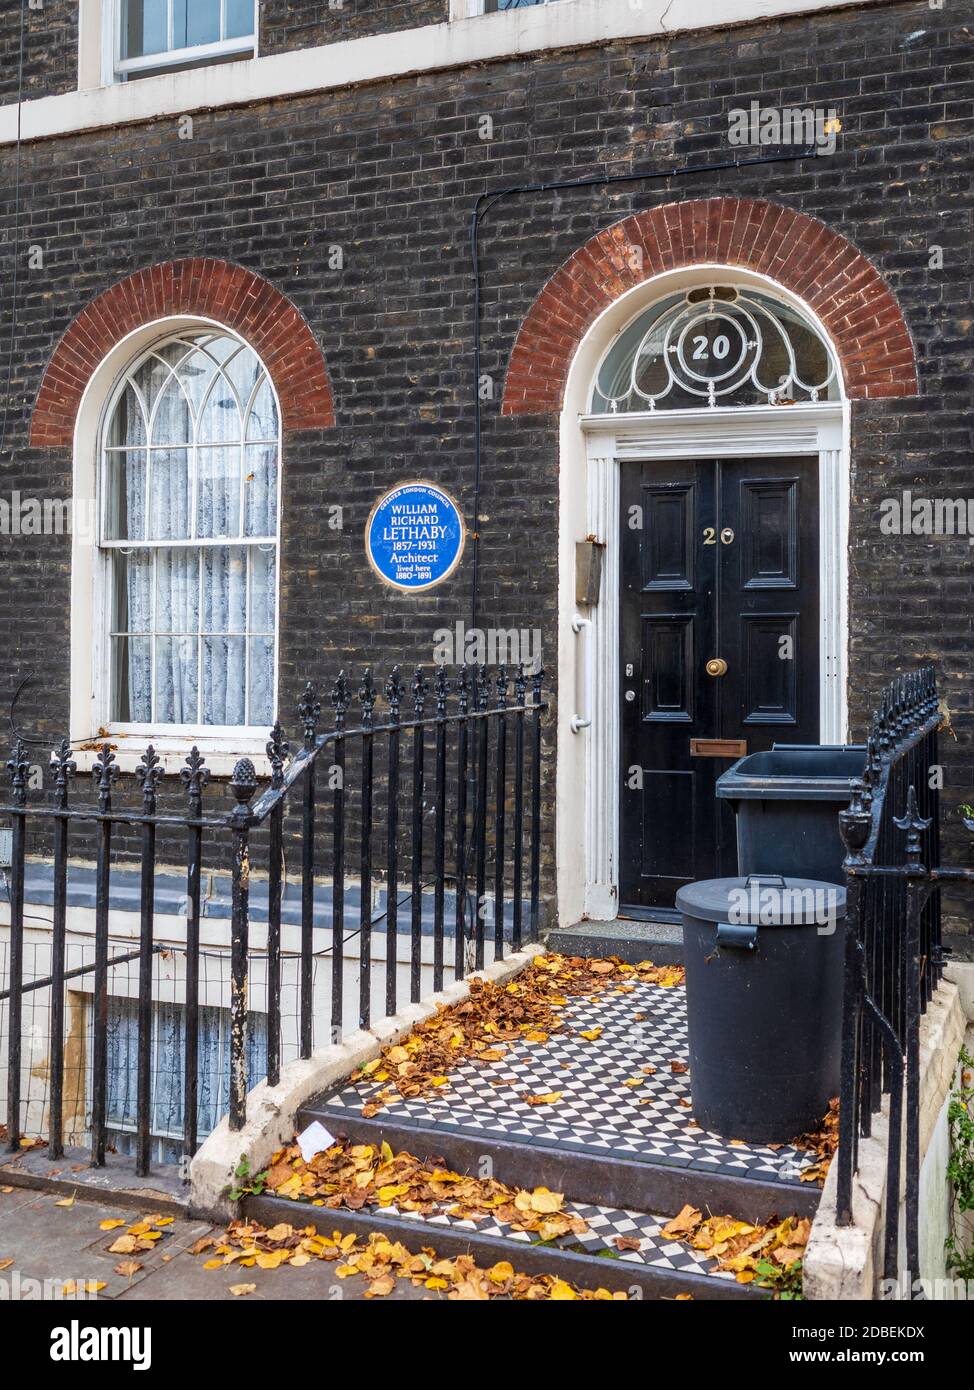 William Richard Lethaby (1857-1931) Architect Blue Plaque at 20 Calthorpe St, London. Influential on the late Arts and Crafts & early Modern movement. Stock Photo